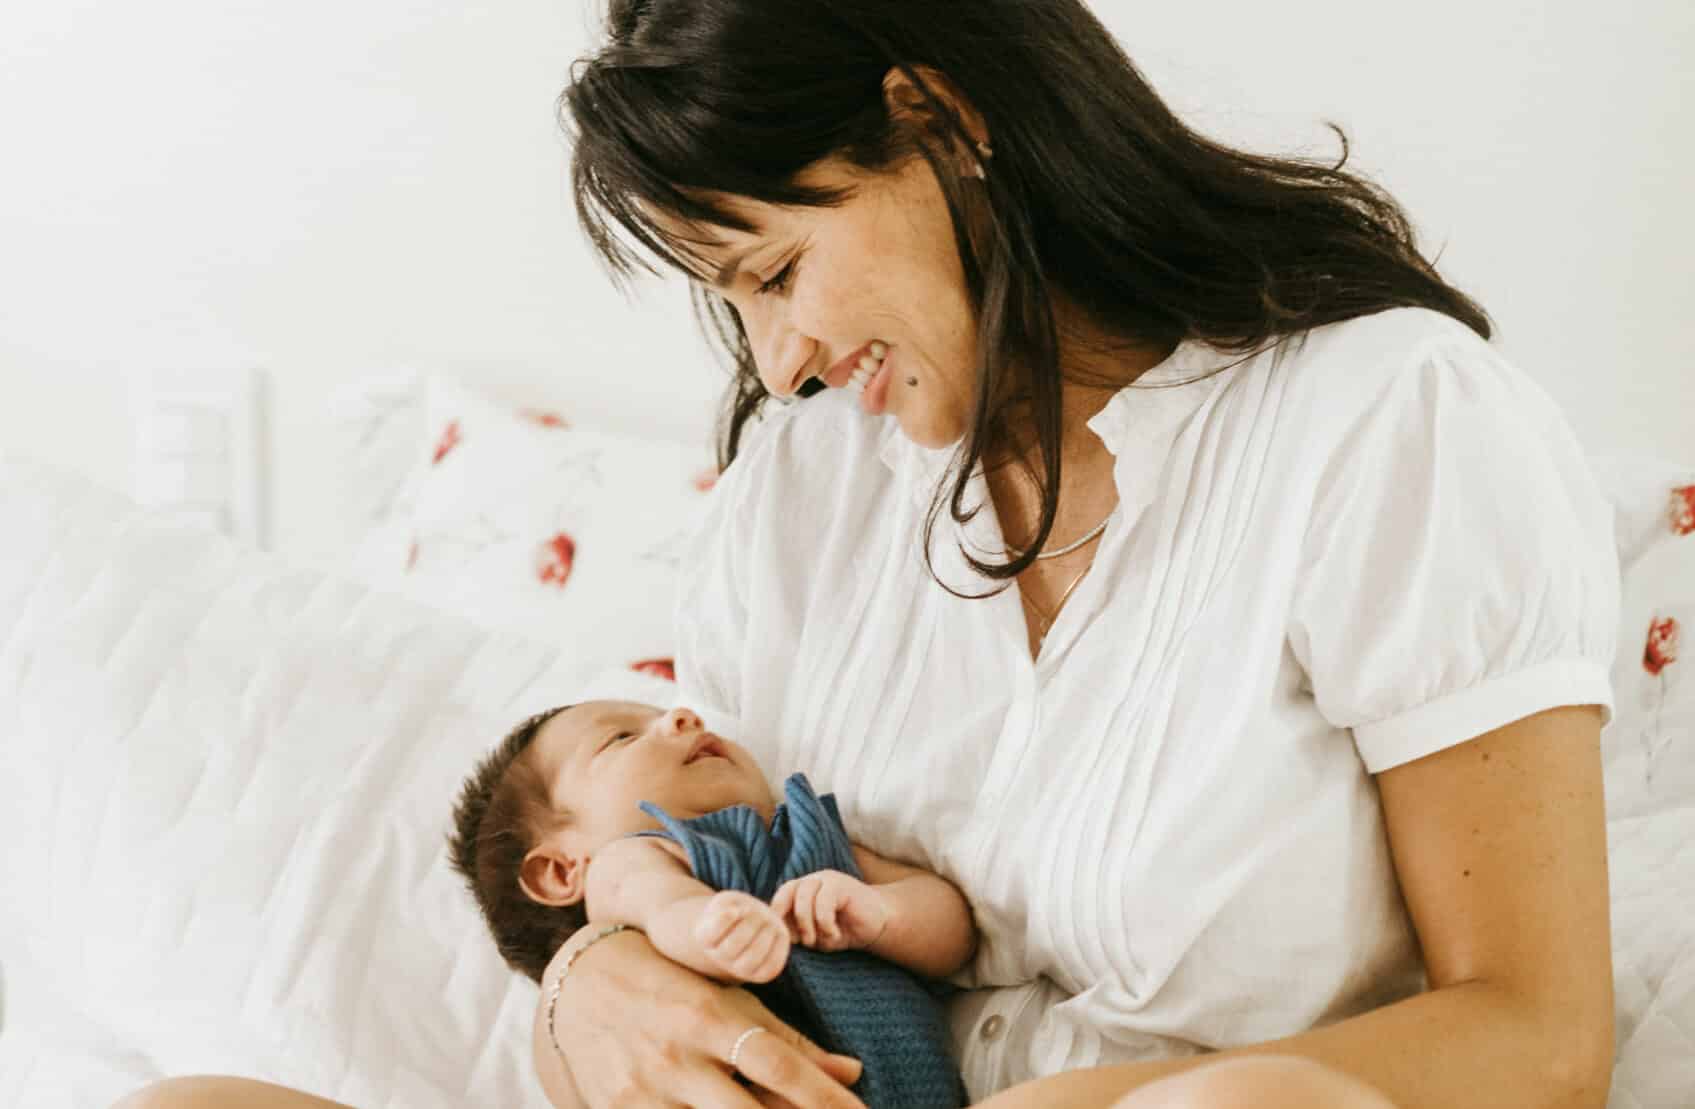 As San Diego's pioneering Nanny Agency, we focus on offering assistance from pregnancy onward, understanding the significance of aiding and supporting new parents